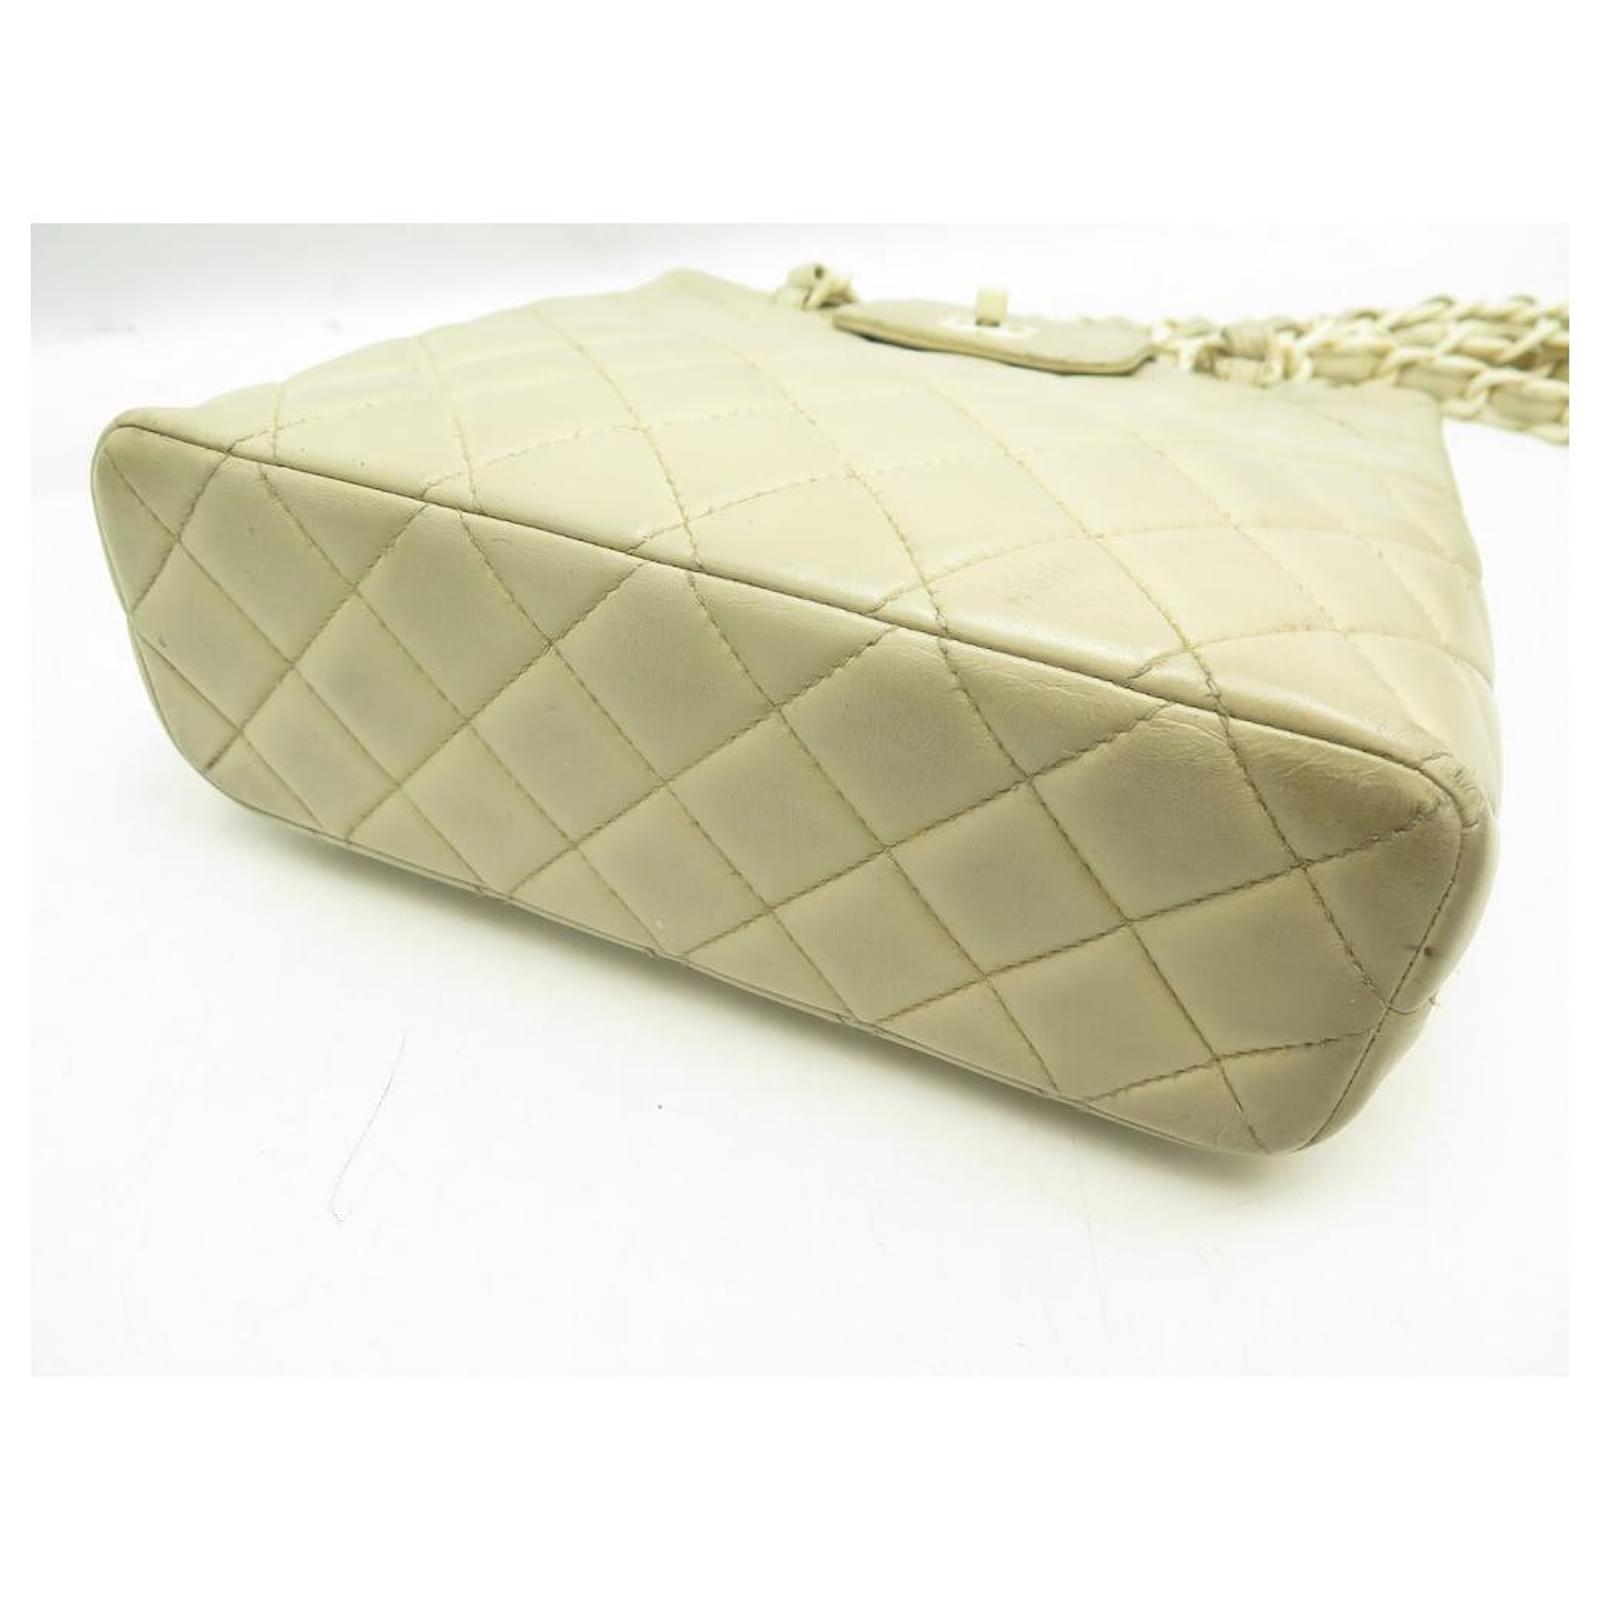 CHANEL Ivory Cream Lambskin Leather Gold Evening Small Shoulder